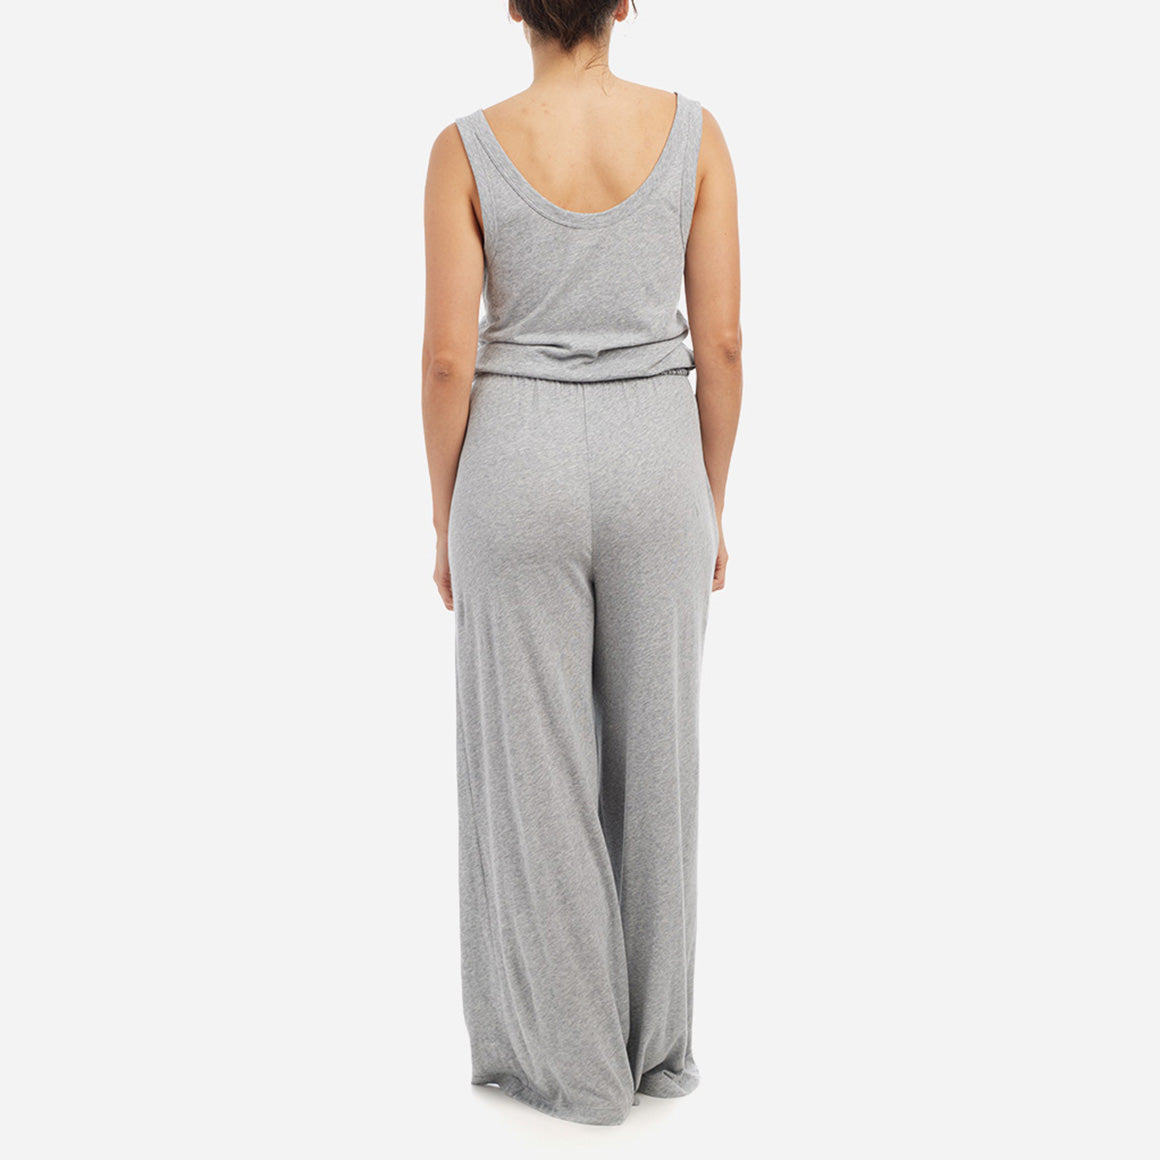 Back facing model wearing a sleeveless heather grey jumpsuit.